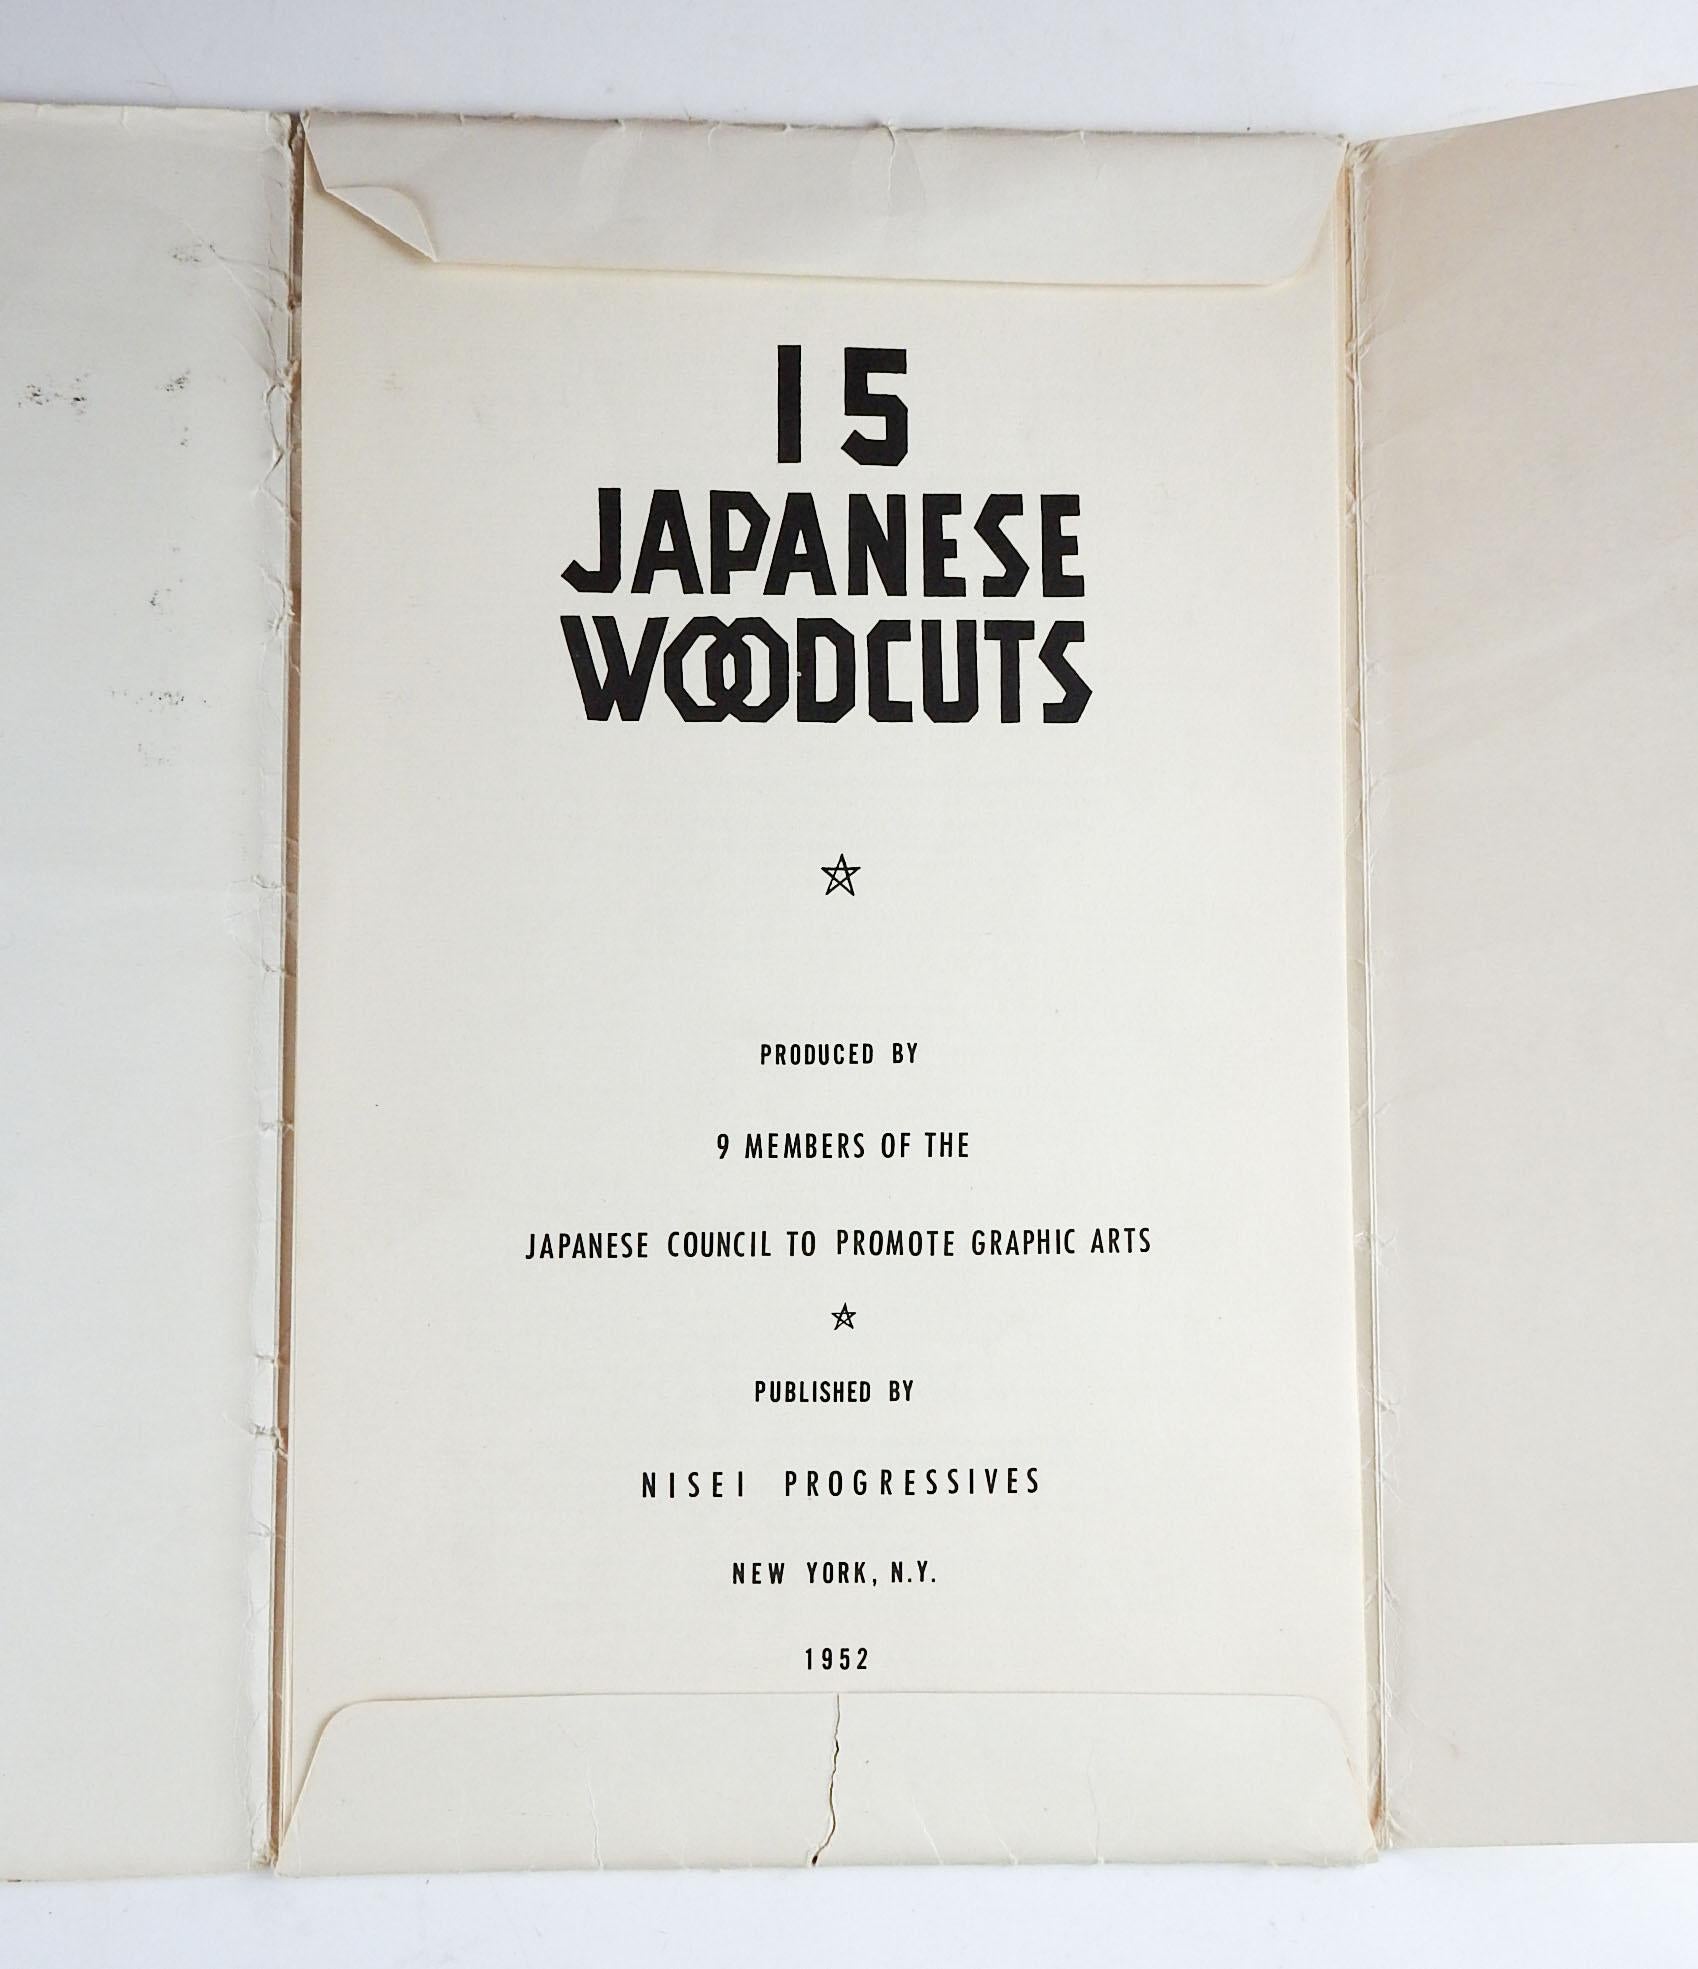 15 Japanese Woodcuts, produced by 9 members of the Japanese Council to Promote Graphic Arts. Published by Nisei Progressives, New York, 1952. From a Tokyo exhibition of leftist Japanese artists, including Shoji Yui(1908-1998) and Shin Watanabe.